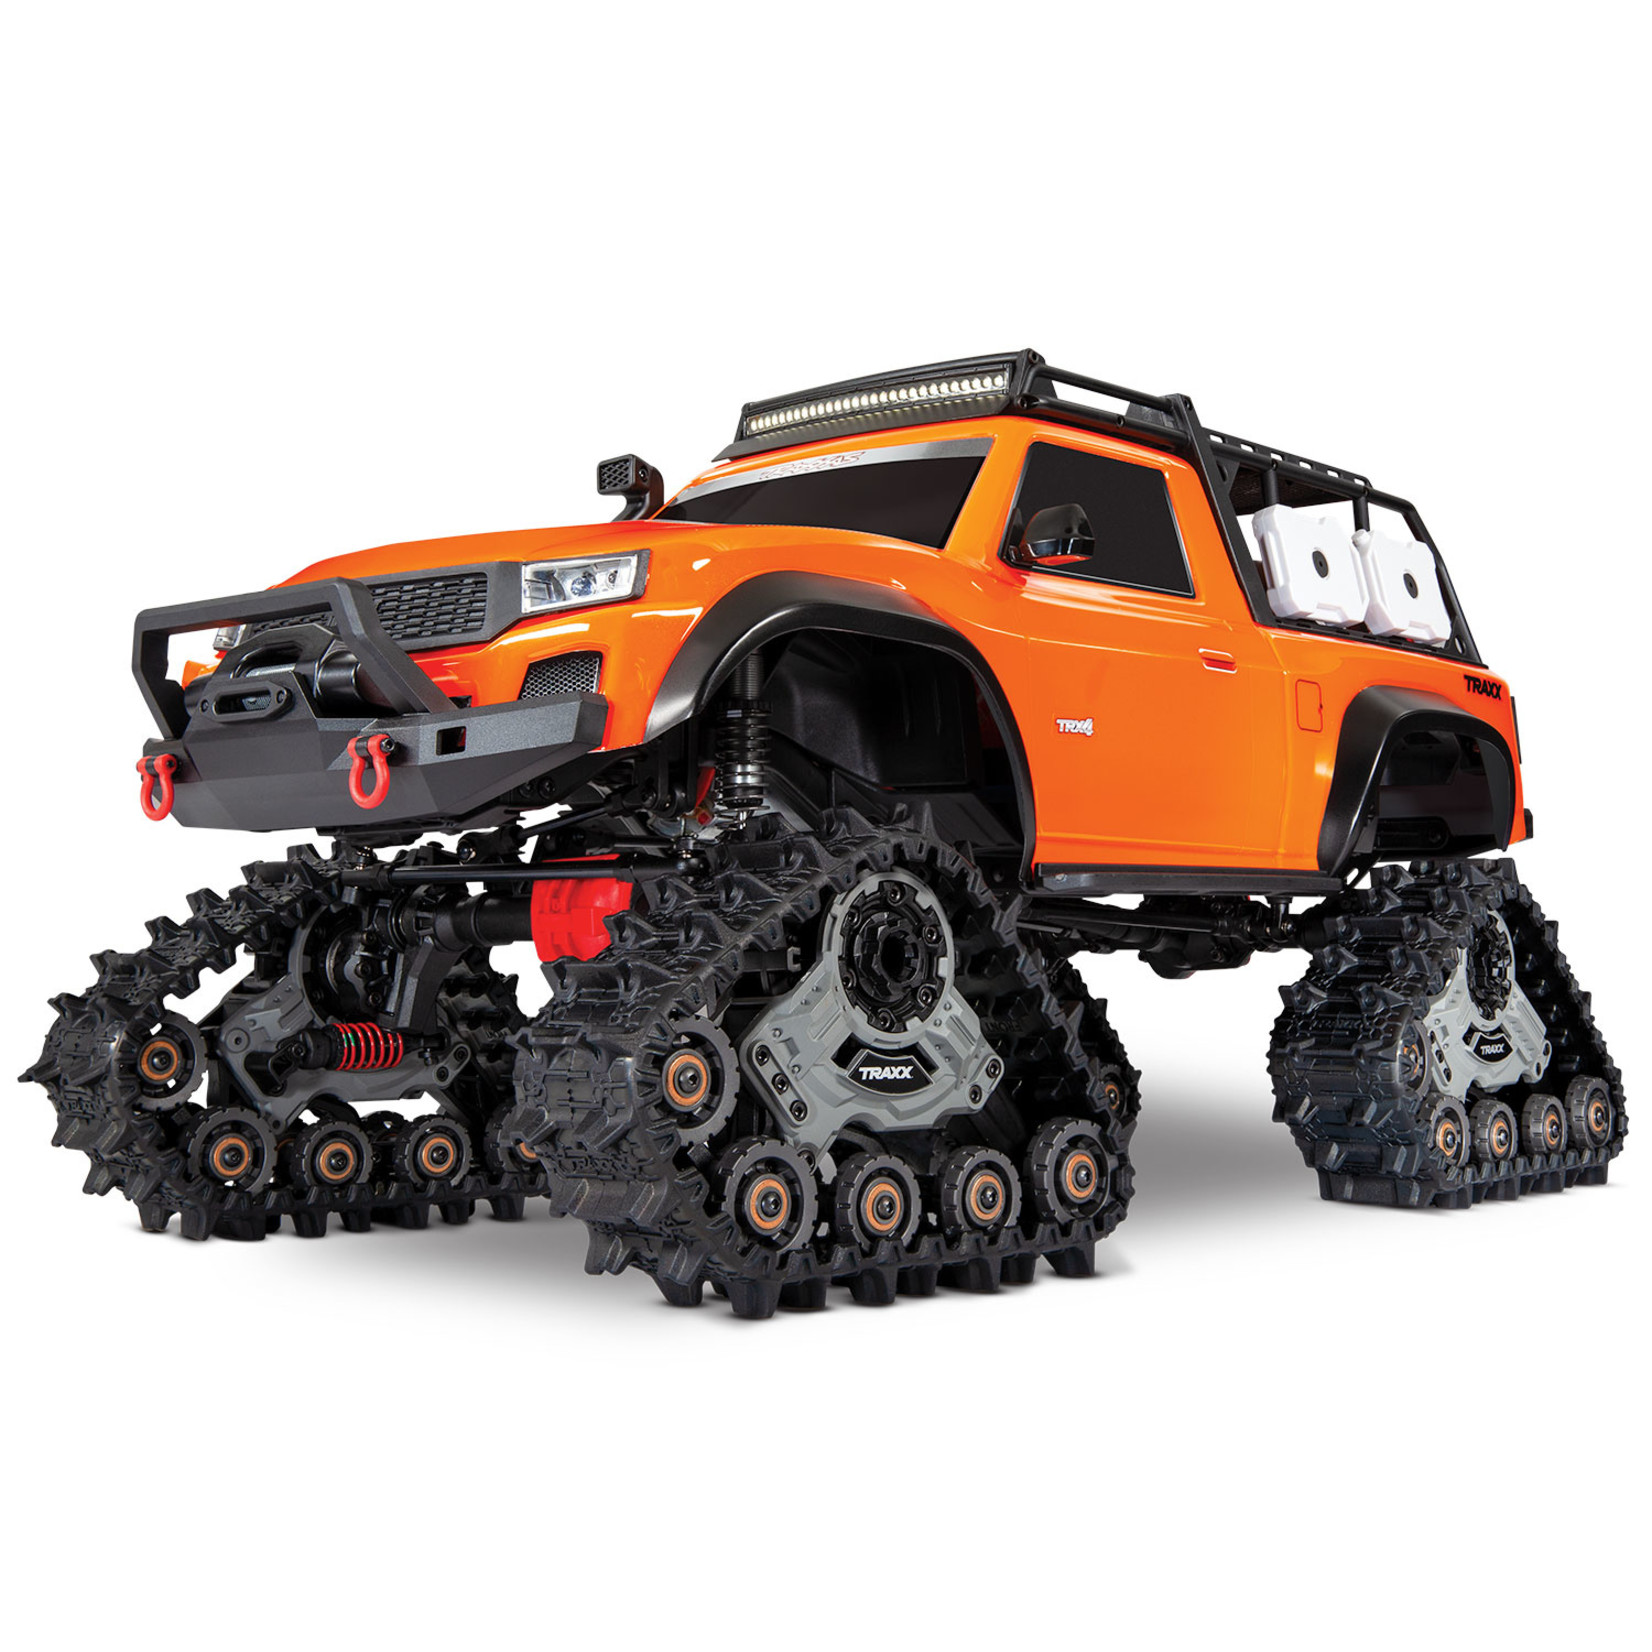 An offroader's review of the TRAXXAS TRX4 model scale radio